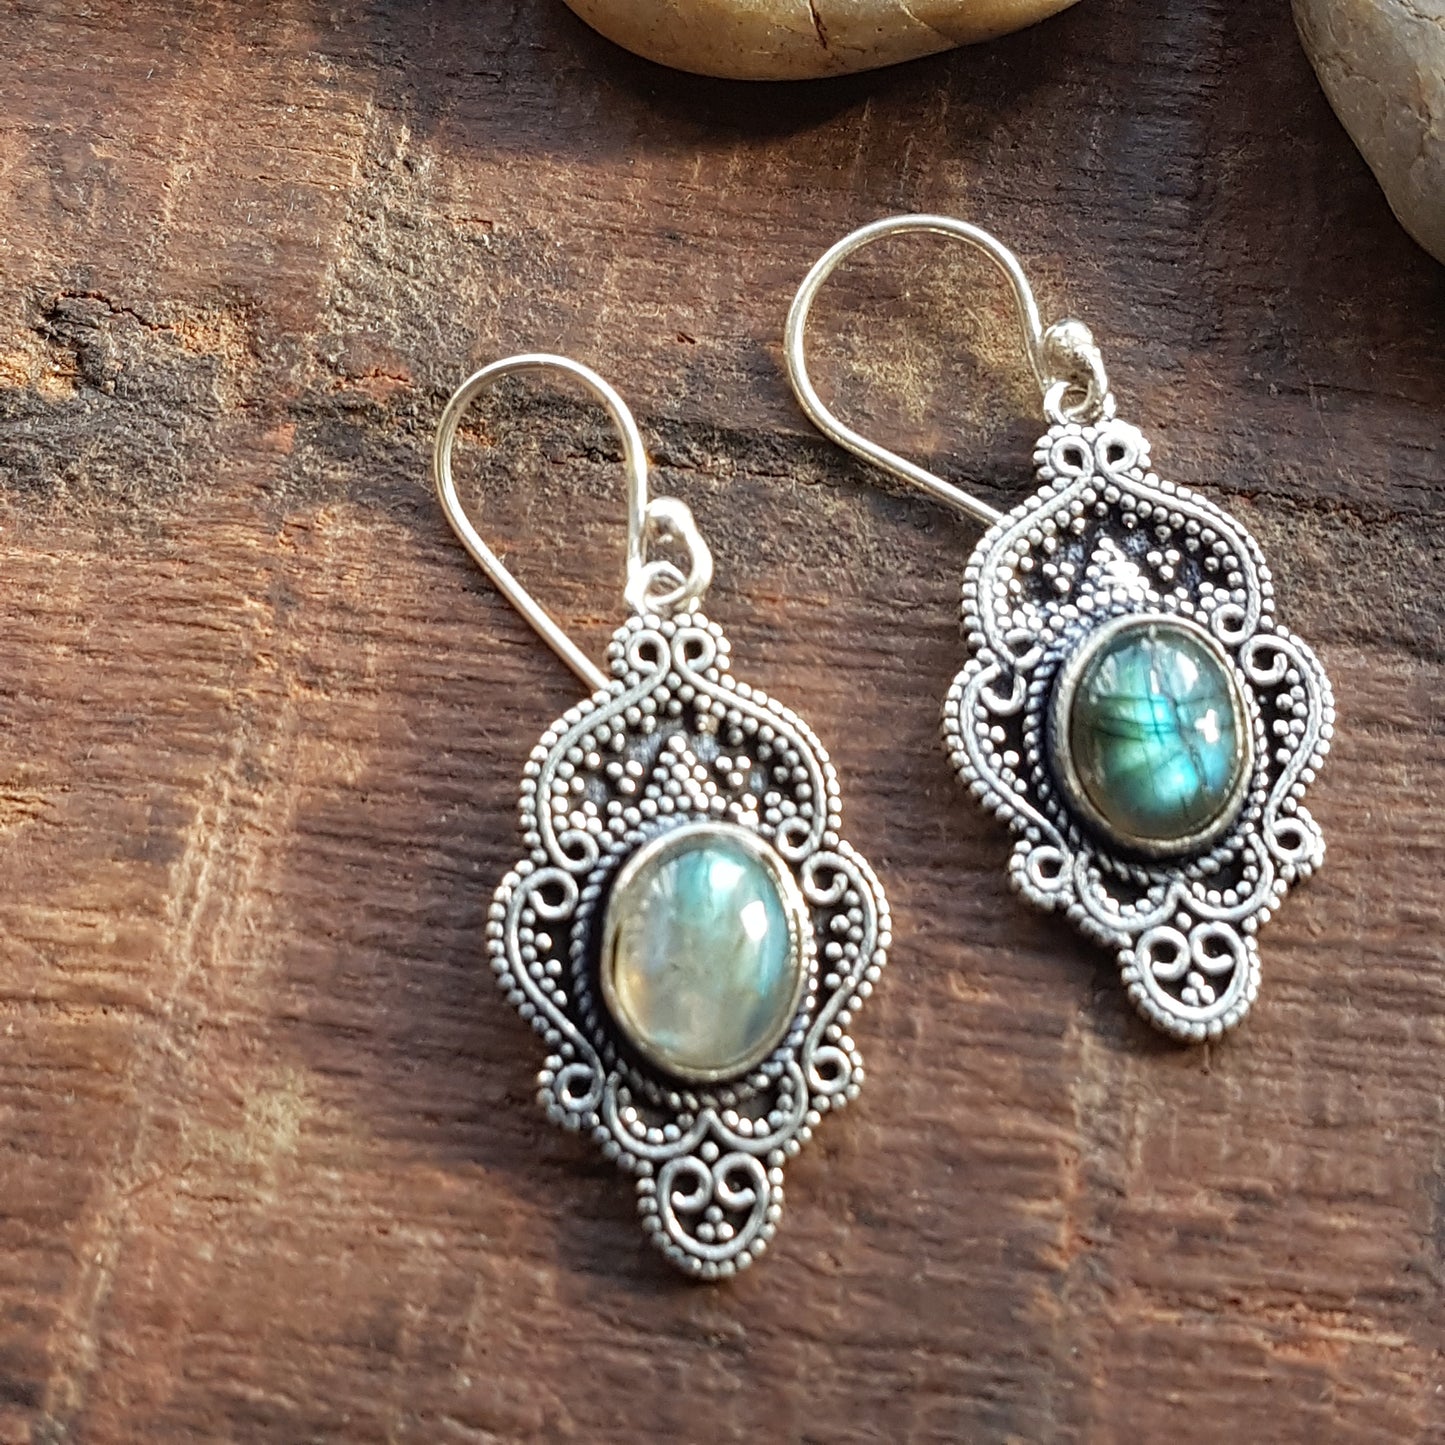 Medieval earrings with crystal stones. Antique silver filigree setting with semi precious stones. Victorian Renaissance jewelry. 2 inches. - Vintage India Ca